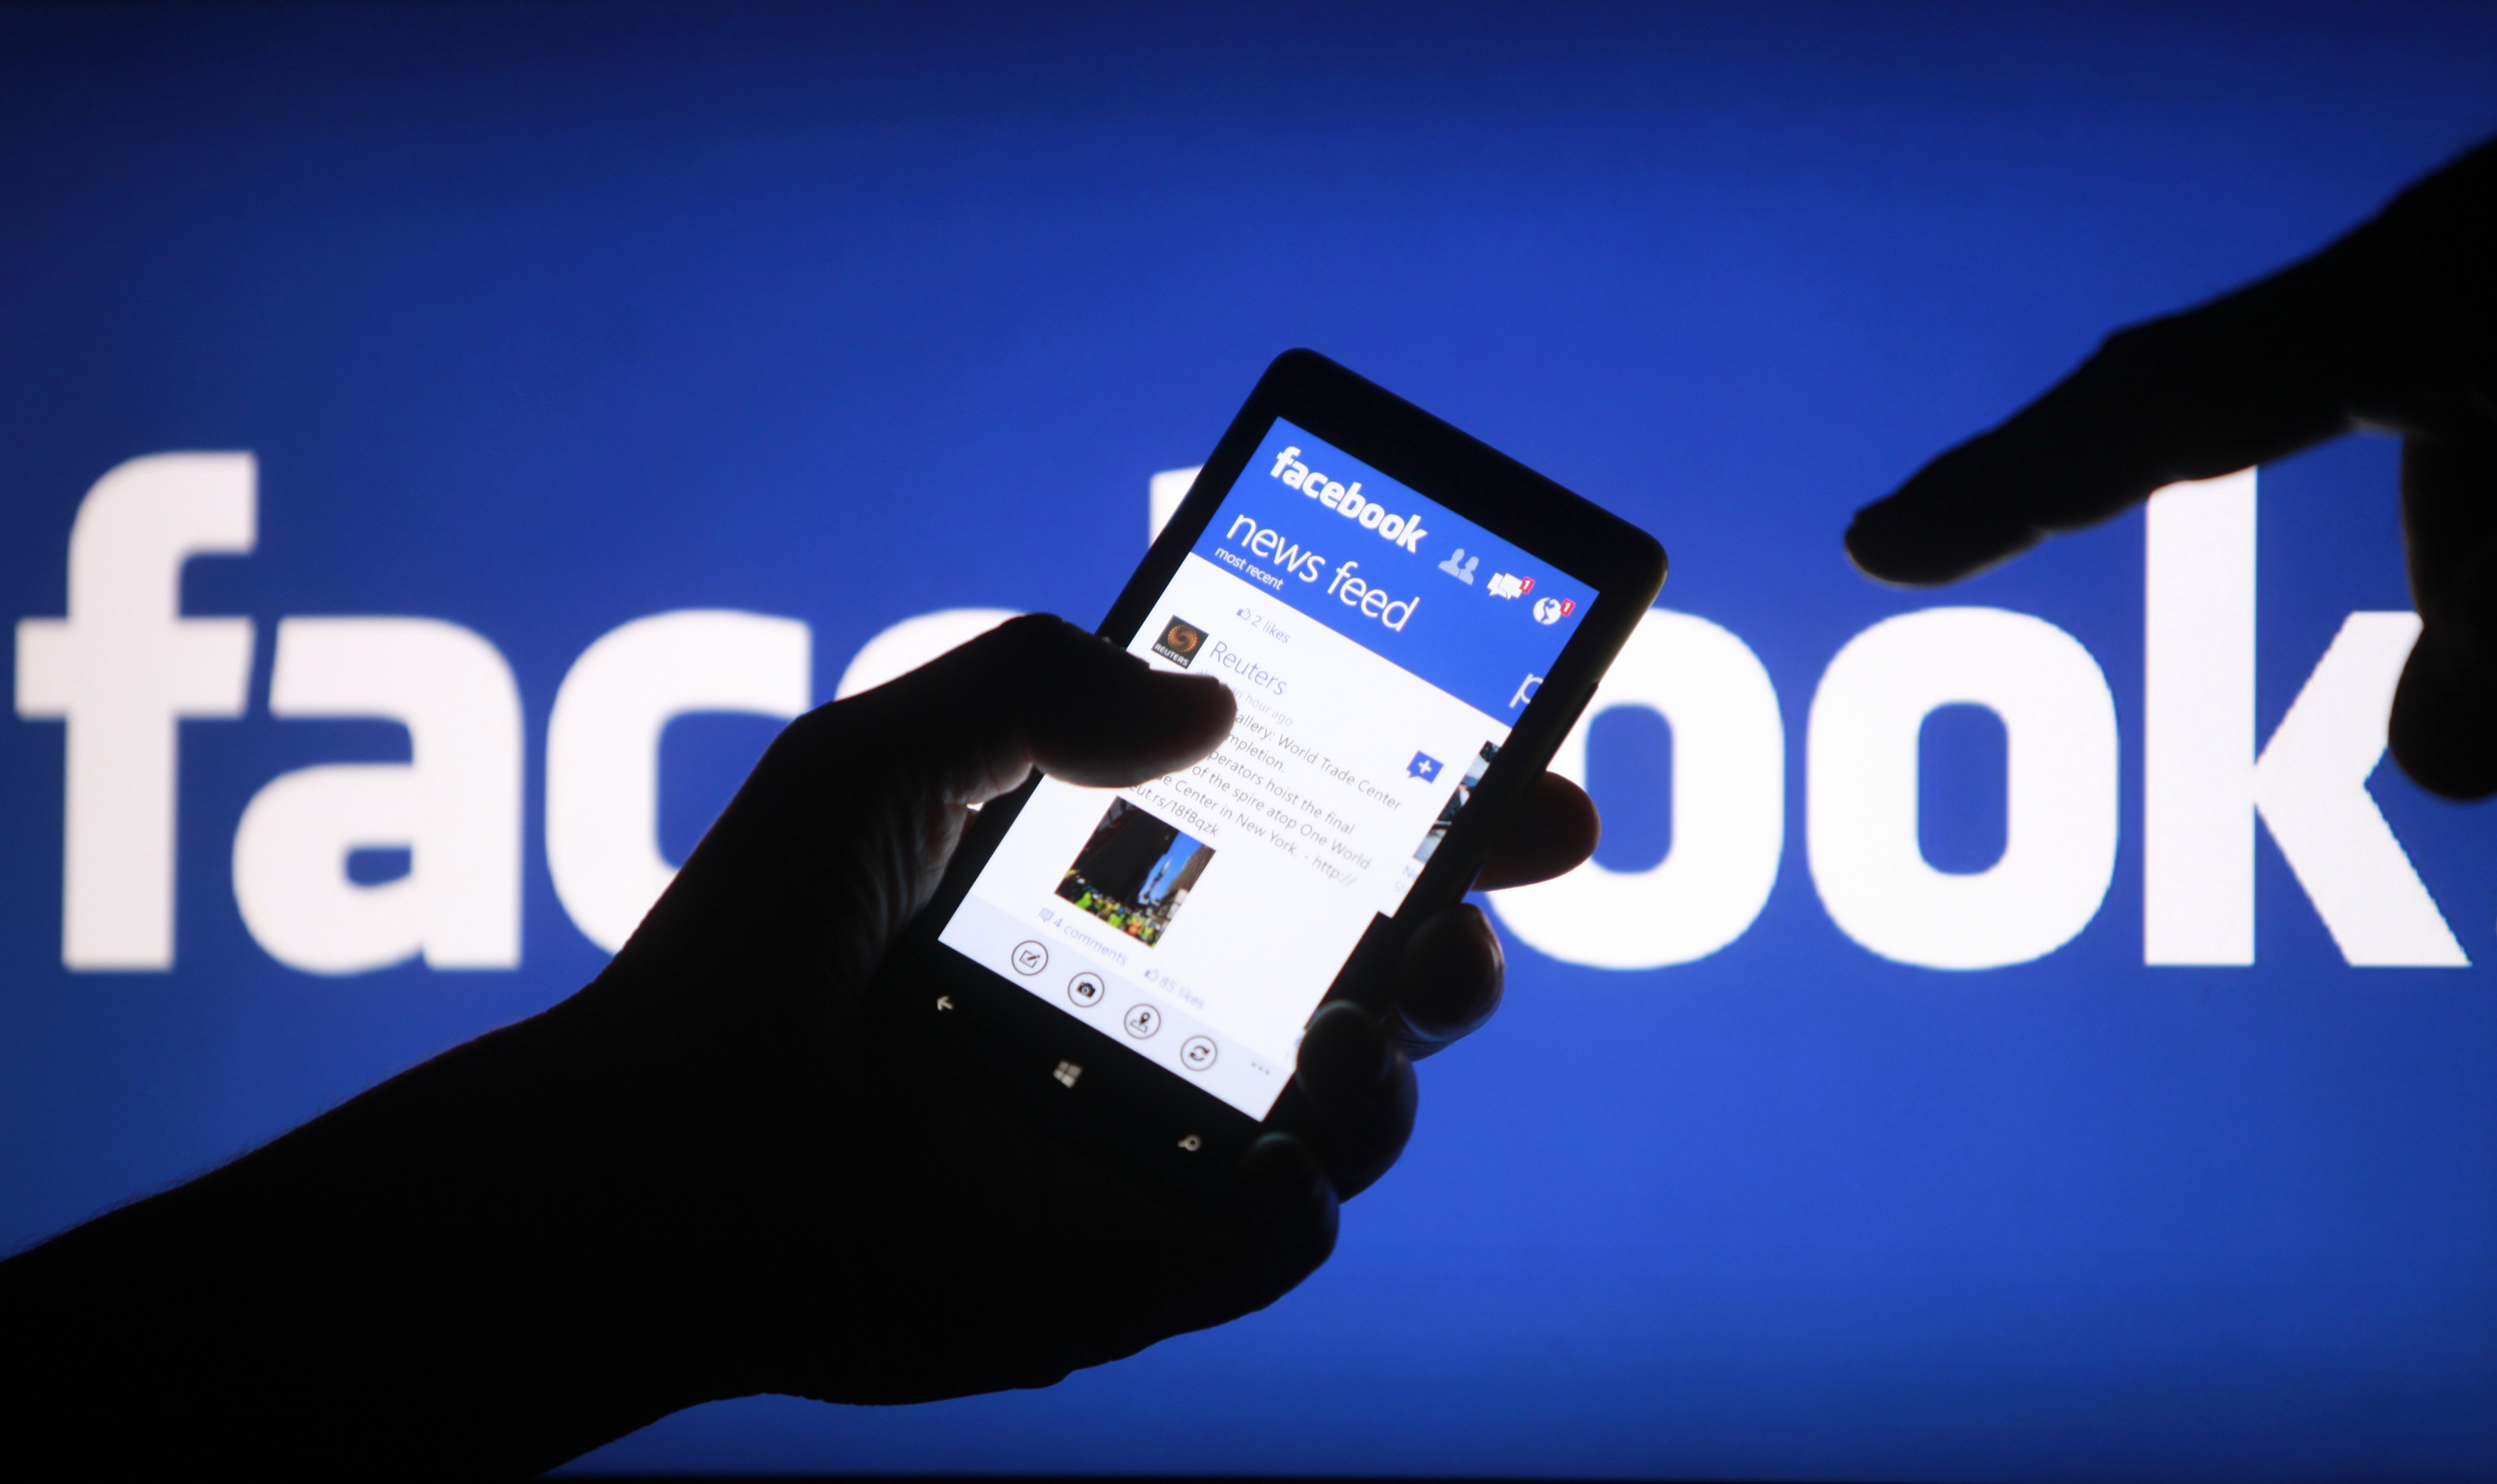 Facebook marketing being shown on a smartphone